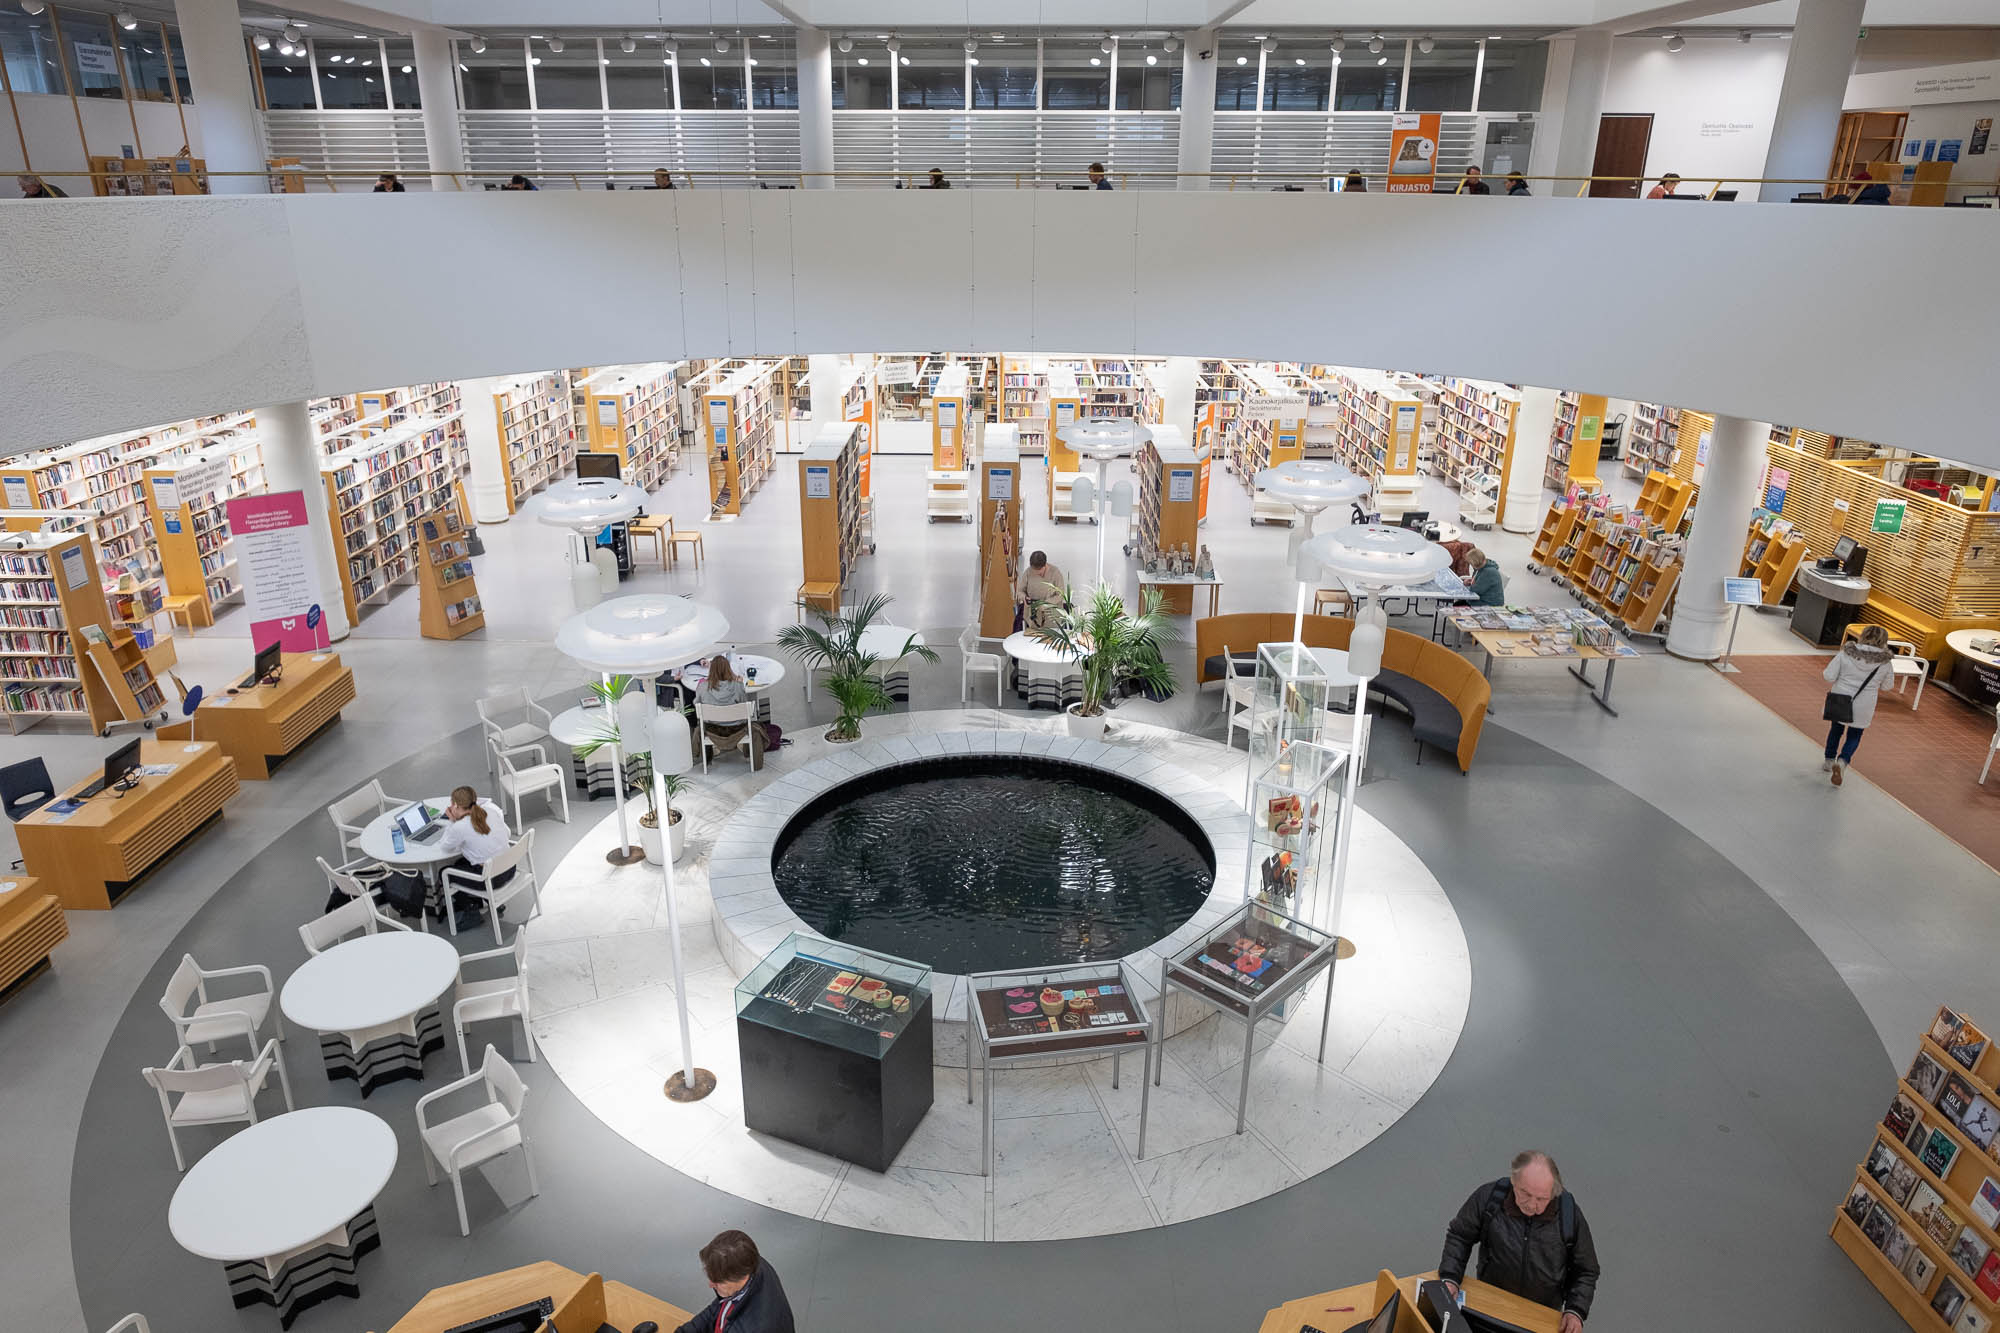 Interior of a modern library, showing a large circular atrium with a fountain in the middle and surrounded by a mezzanine. The photo is taken from the mezzanine. On the bottom floor are rows of bookshelves in blond wood. Round tables, chairs and houseplants are arranged around the fountain.